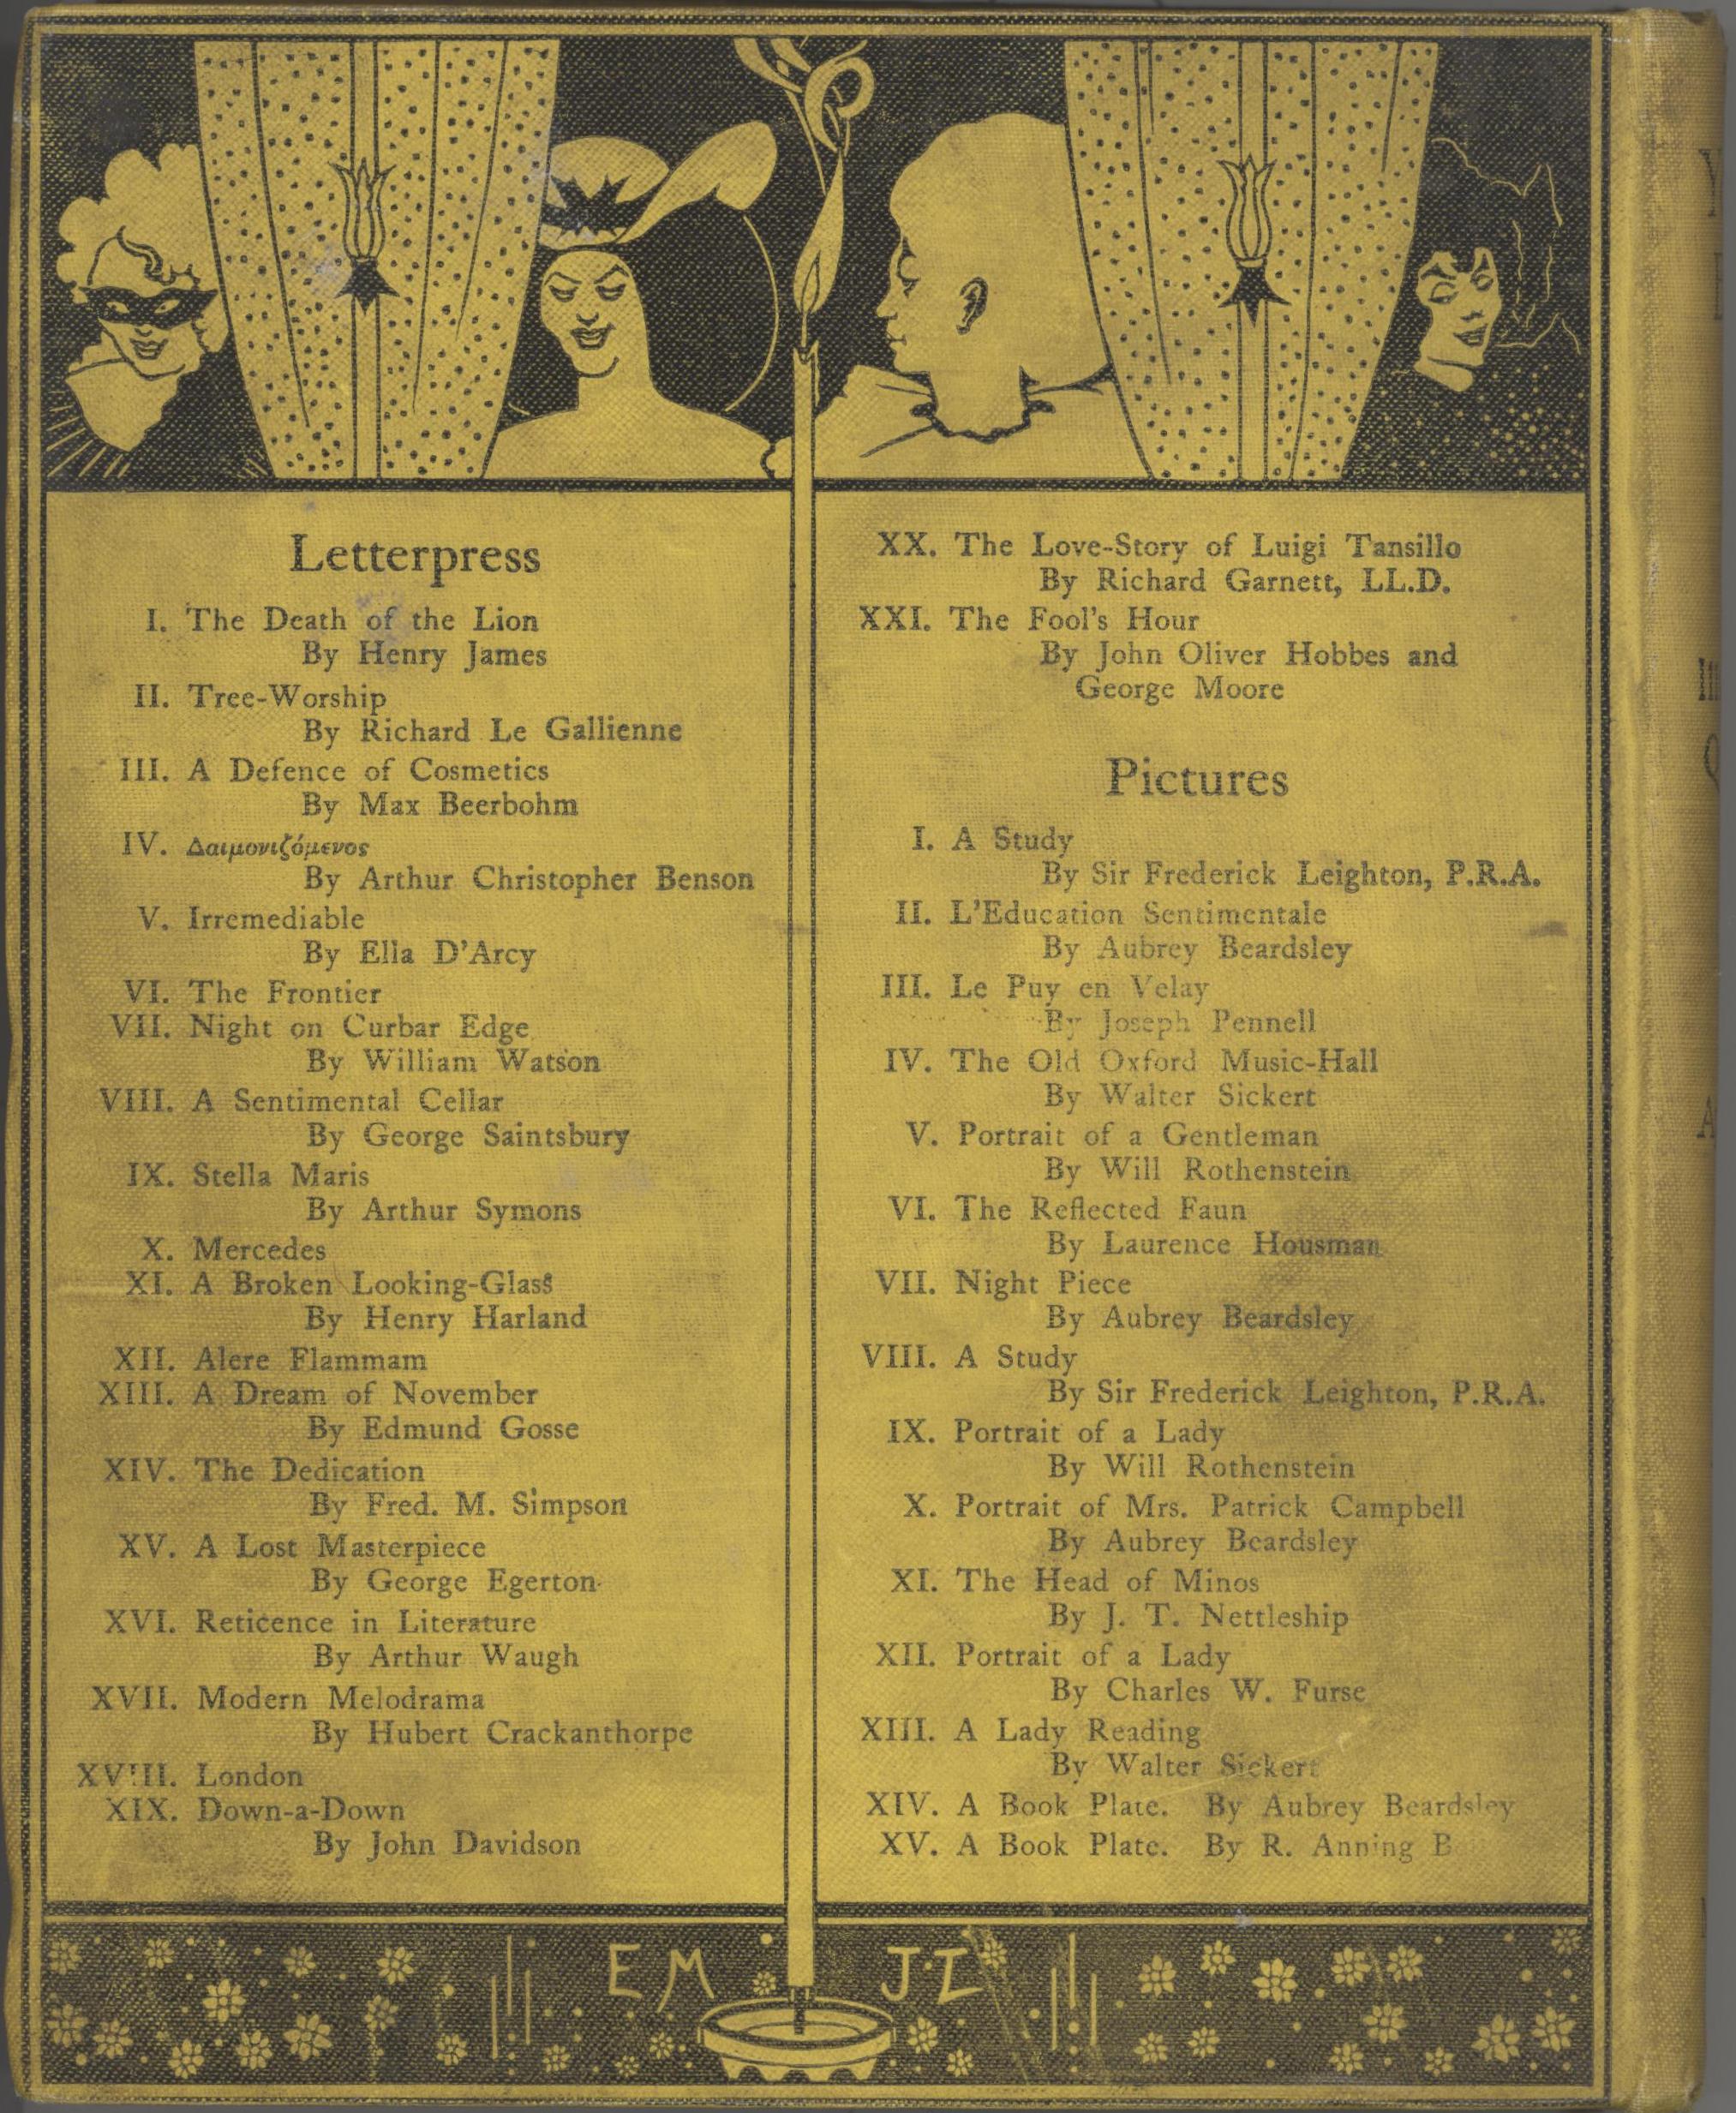 Back cover is divided vertically by a lit candle, which divides Letterpress list from Pictures List. Divided horizontally at top by black frame of curtained window. At left is a frontal torso of a bare-shouldered, smiling black-haired woman in large hat with bow; at centre, torso of a harlequin in profile, with large ruff on neck; behind curtain at right, a 3/4 view torso of woman in black, with black hair, smiling with downcast eyes, facing right. Candelabra at far left and middle right. Curtains are polka-dot.